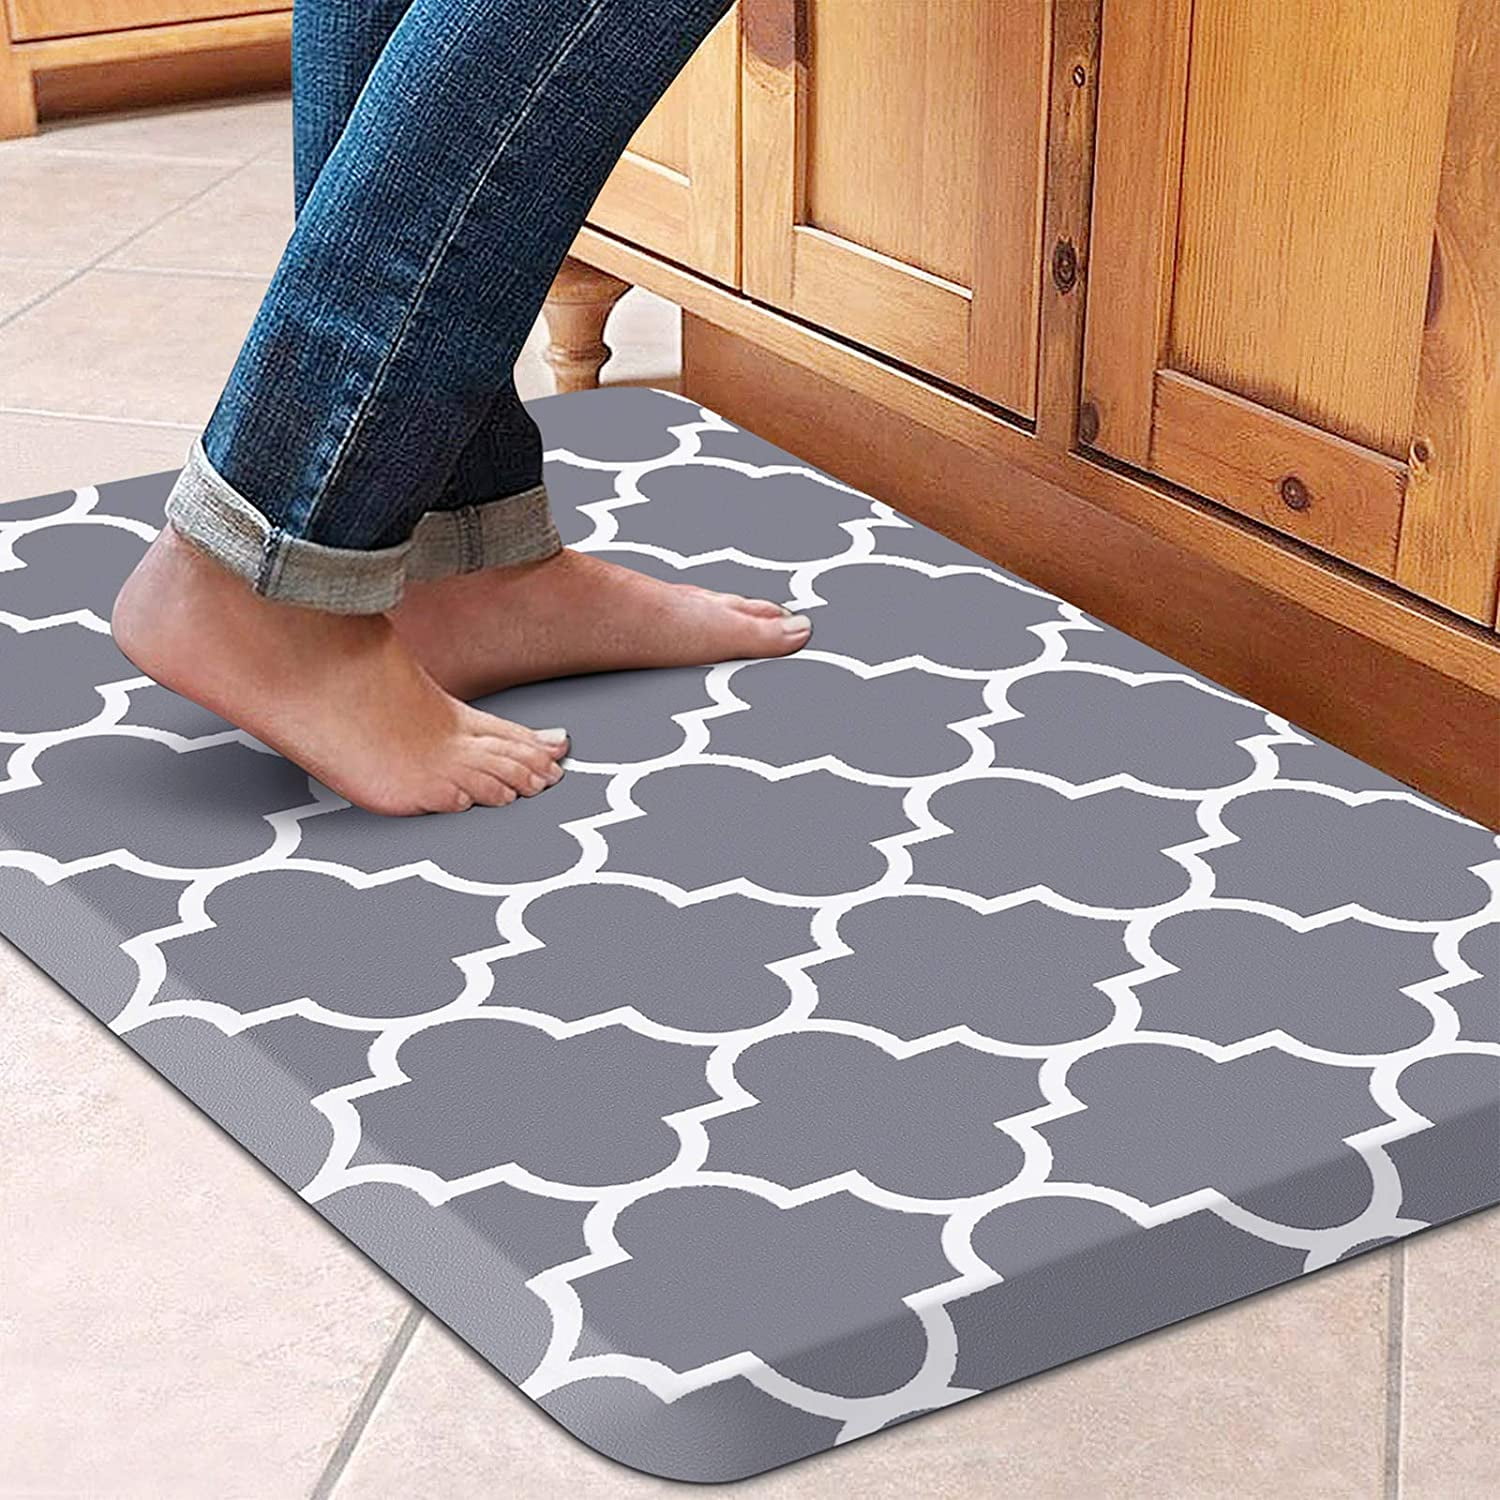 17 x 29+17 x 47, Black Diamond KIMODE Anti Fatigue Kitchen Rug Non Slip Rubber Back for Indoor Outdoor Home Office Use Waterproof PVC Leather Heavy Duty Standing Desk Mats